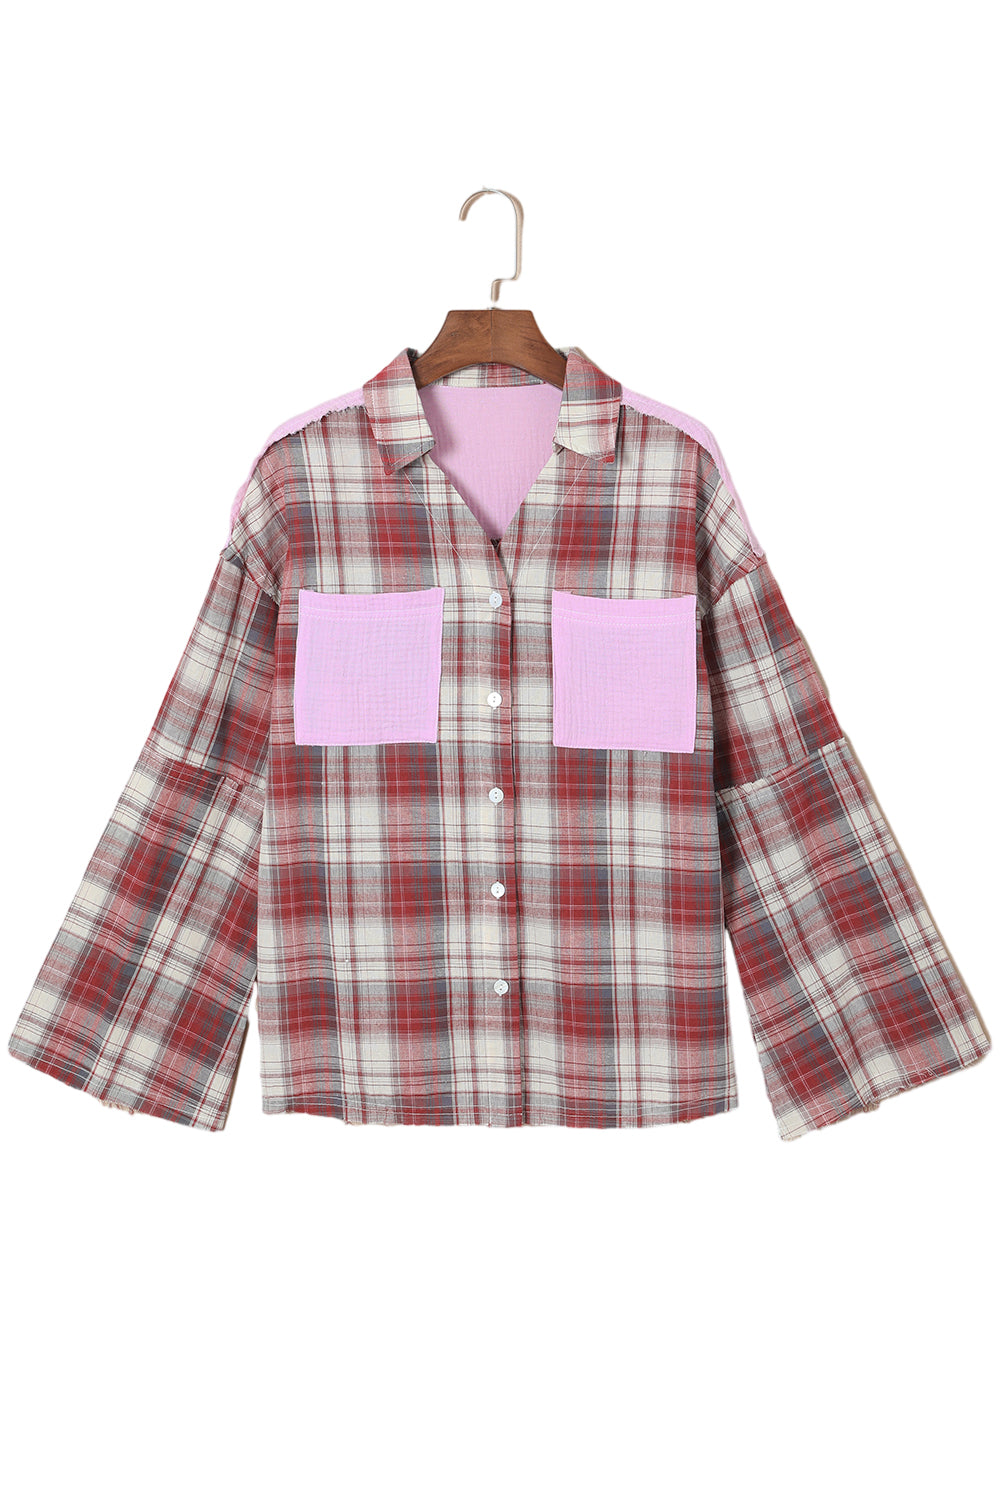 Fiery Red Contrast Patchwork Raw Edge Distressed Plaid Shirt